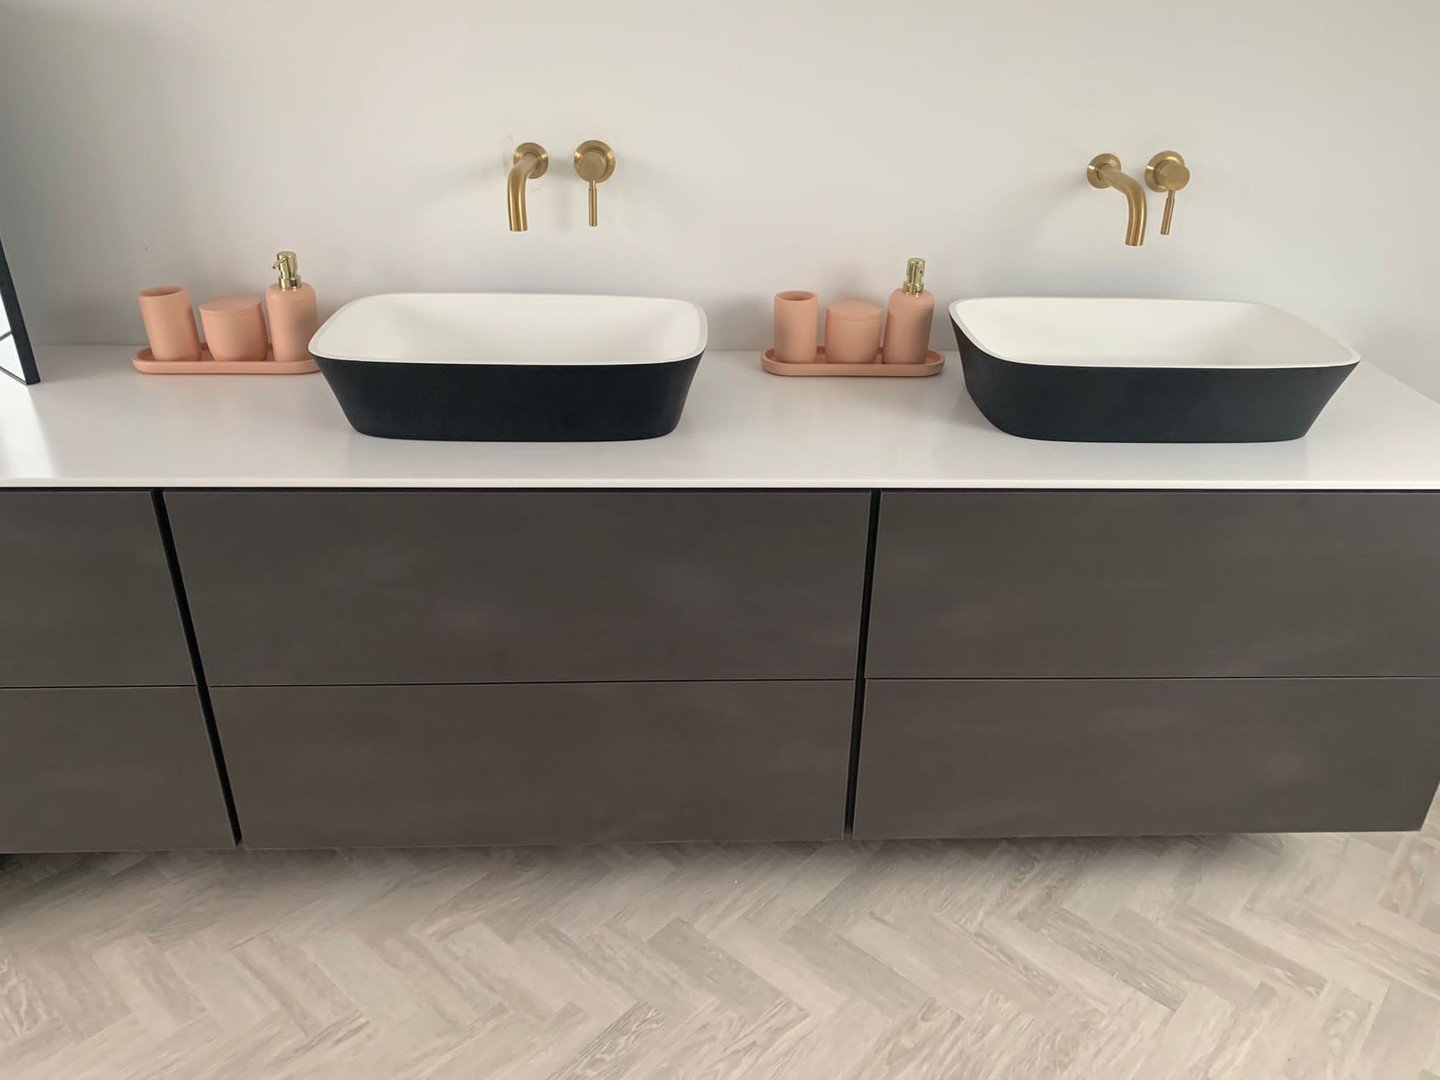 🔨 Custom-made to fit your style and needs, our bathroom units combine premium materials with expert craftsmanship.

Supermatt unit with solid surface worktop, Stirling made.

Contact our Stirling Team today 📞 01204 694466